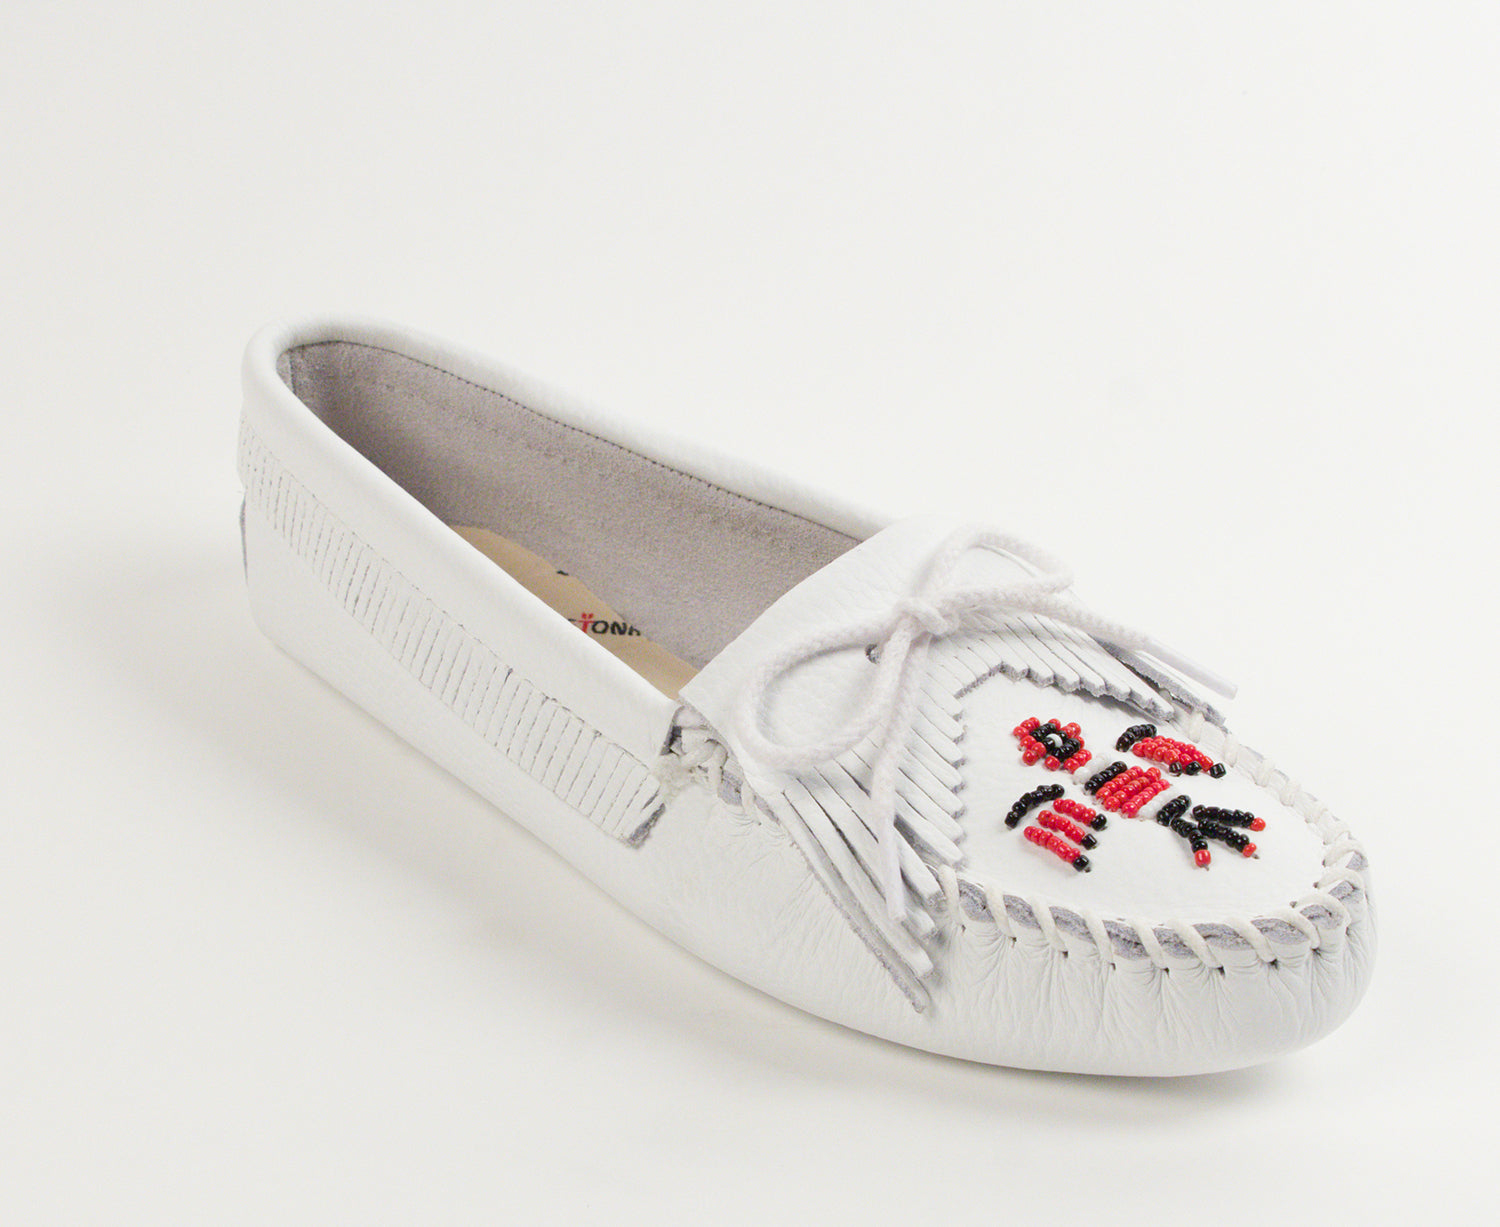 Thunderbird Softsole Moccasin in White from 3/4 Angle View